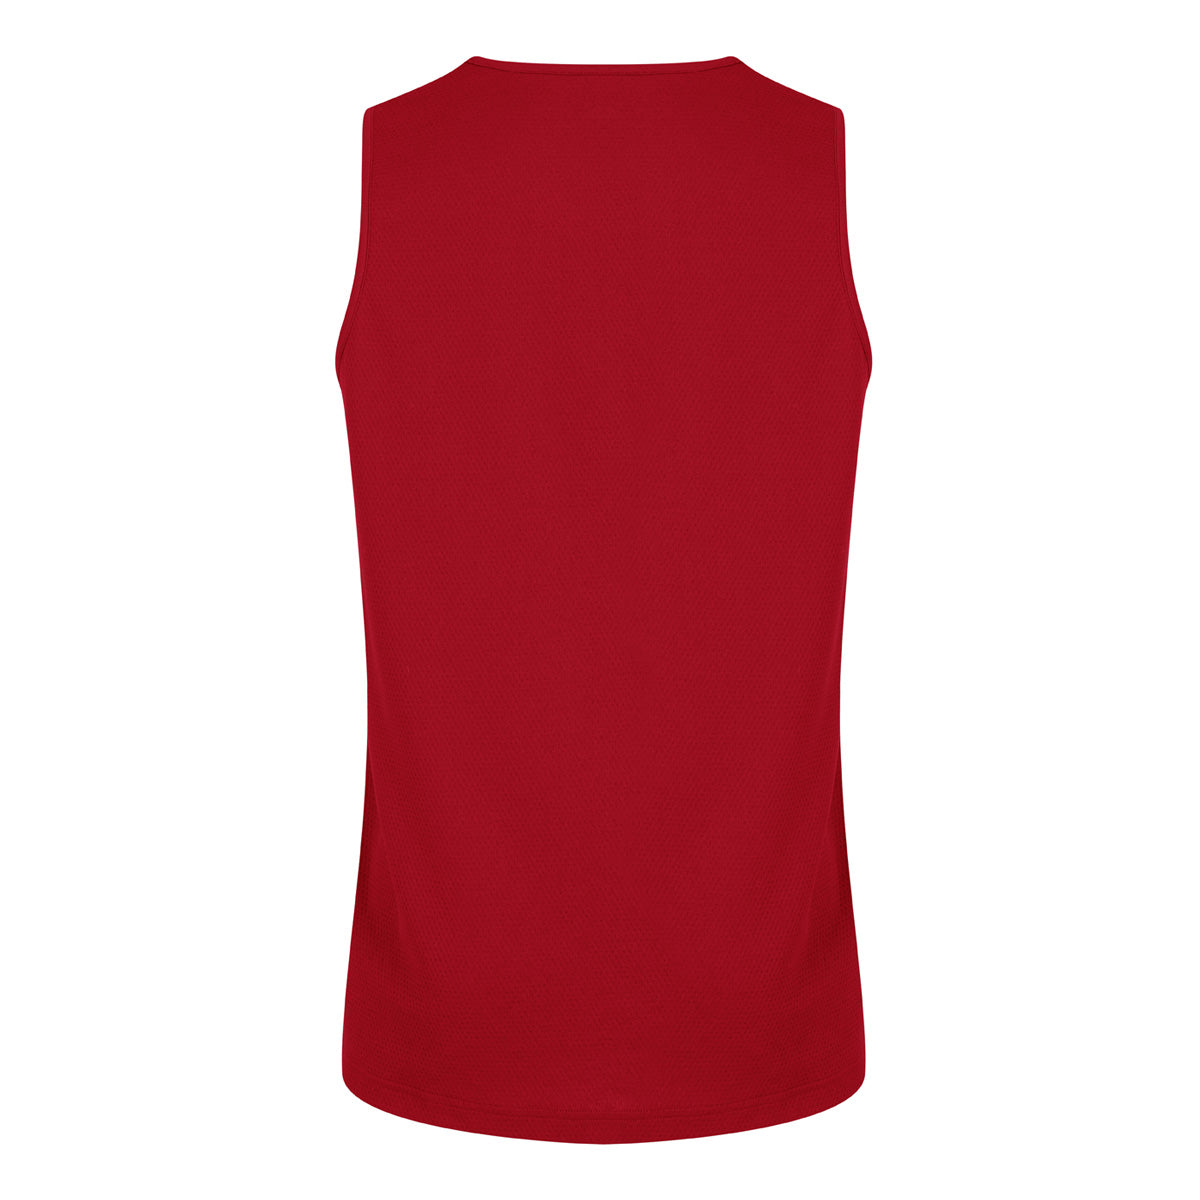 Front photo Canterbury Club Dry Singlet in Red